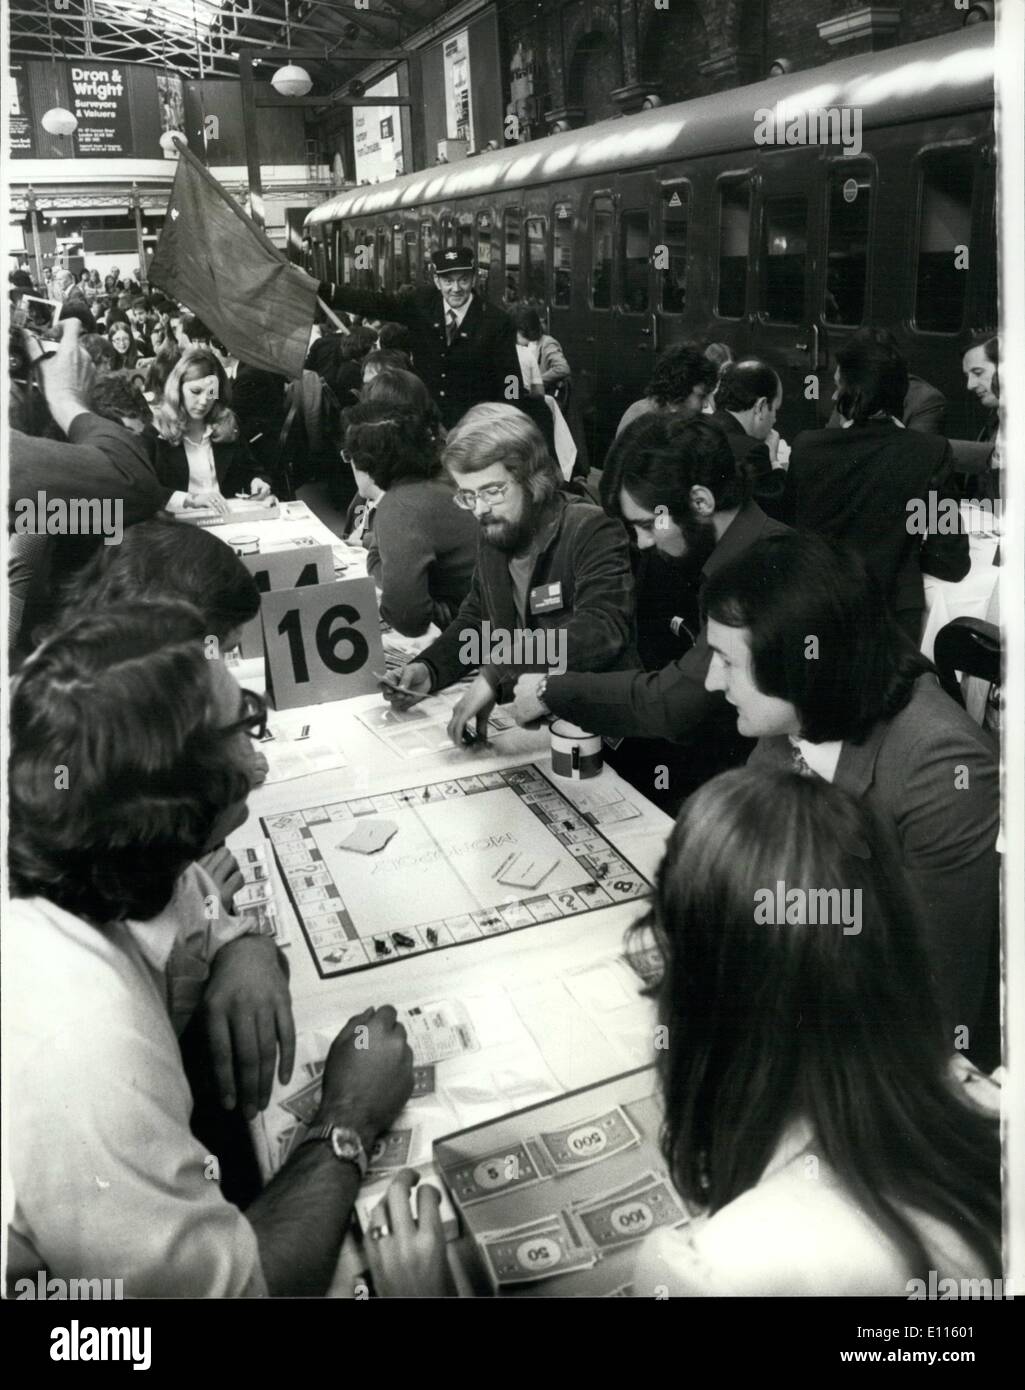 Sep. 09, 1975 - British ''Monopoly'' Championships were today being staged on platforms at Penchurch Street railway station. The British finals are part of a 100,000 international tournament being held to find the World ''Monopoly'' champion. The European Finals take place in Raykjavik in Iceland in November, and the World Final is being held in Atlantic City on November 23rd. Photo Shows A guard waves his flag to get his train away from platform 4 at Penchurch Street Station this morning in spite of over 200 competitors competing in the ''Monopoly'' championship taking place there. Stock Photo